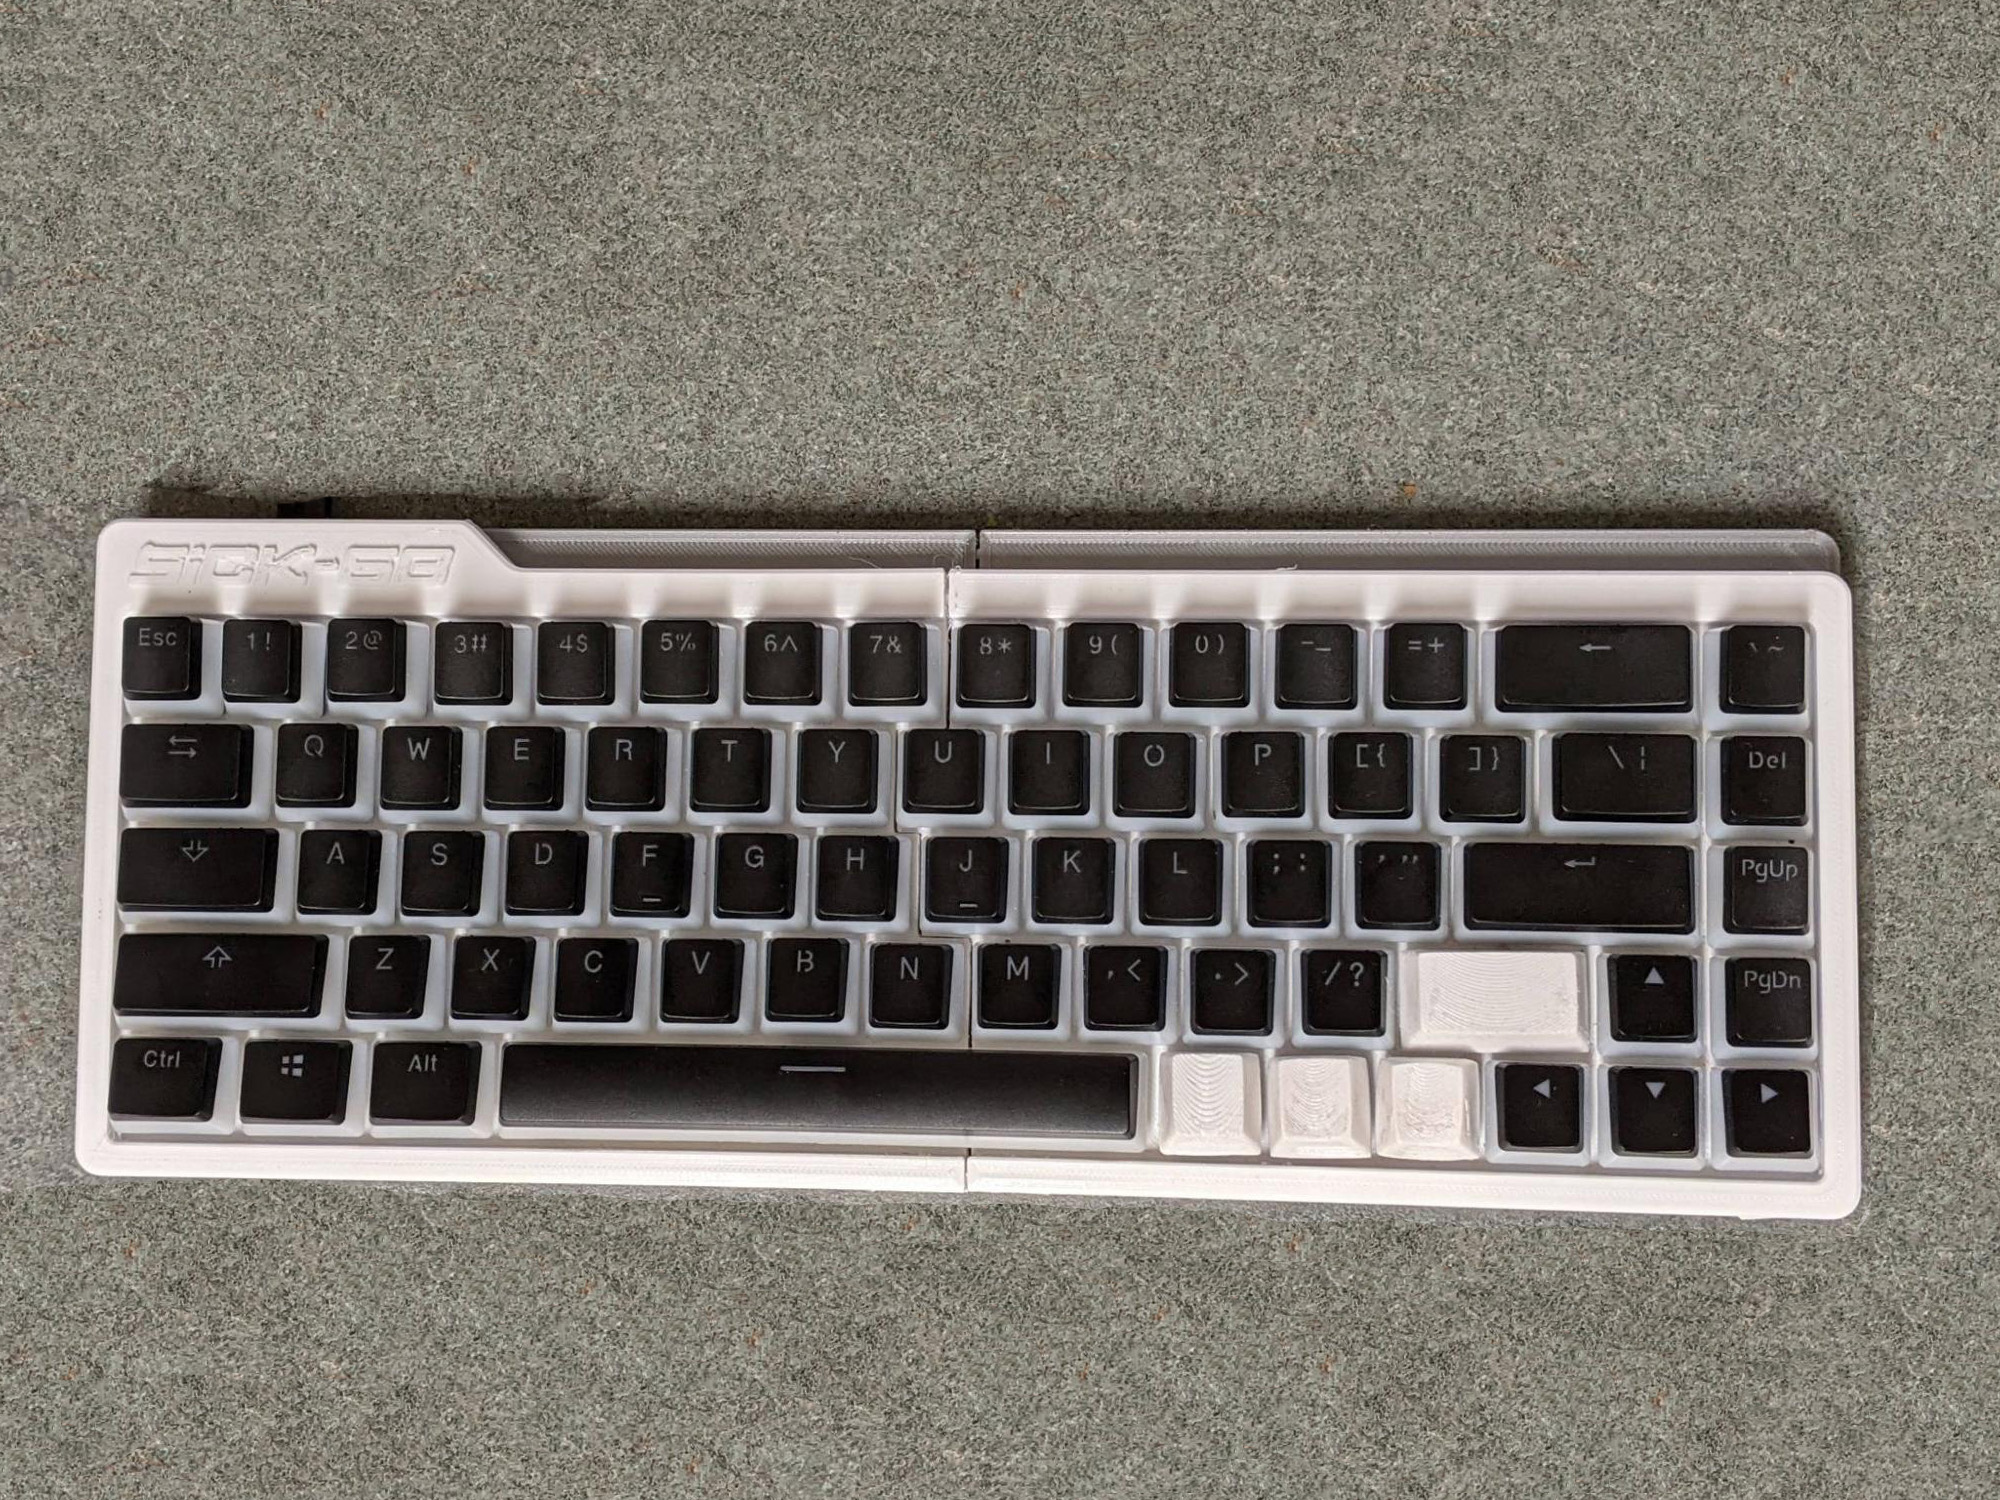 Build a mechanical keyboard from scratch with 3D-printed components